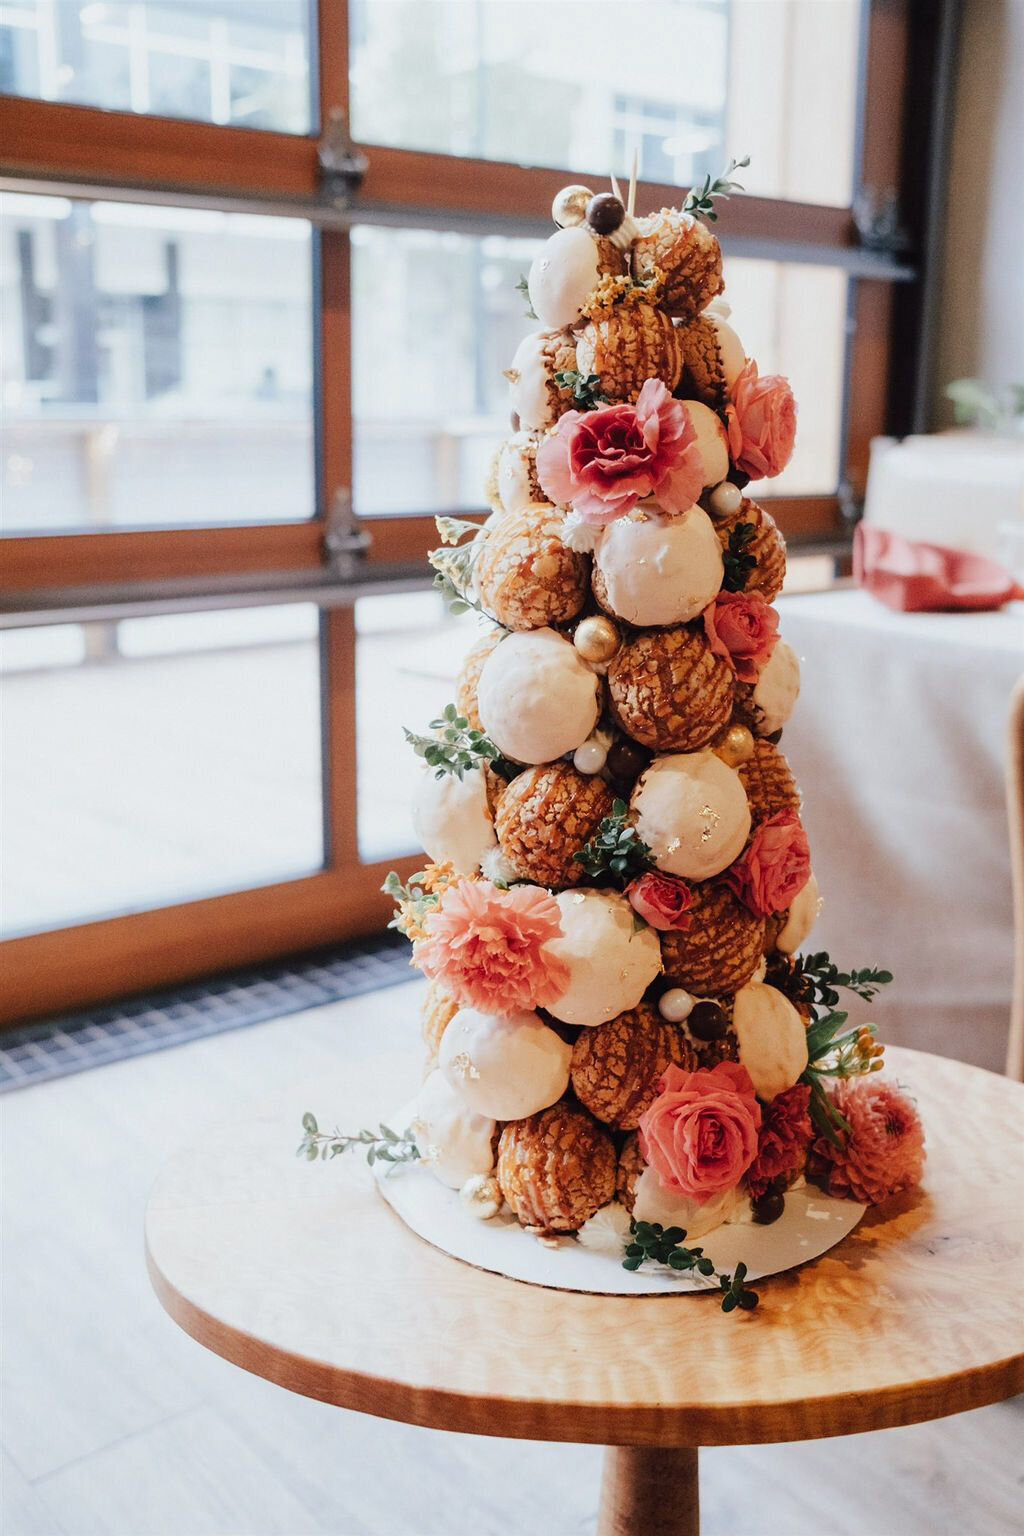 Innovative cream puff tree, created by Crème Cream Puffs, playful and modern cakes & desserts in Calgary, Alberta, featured on the Brontë Bride Vendor Guide.